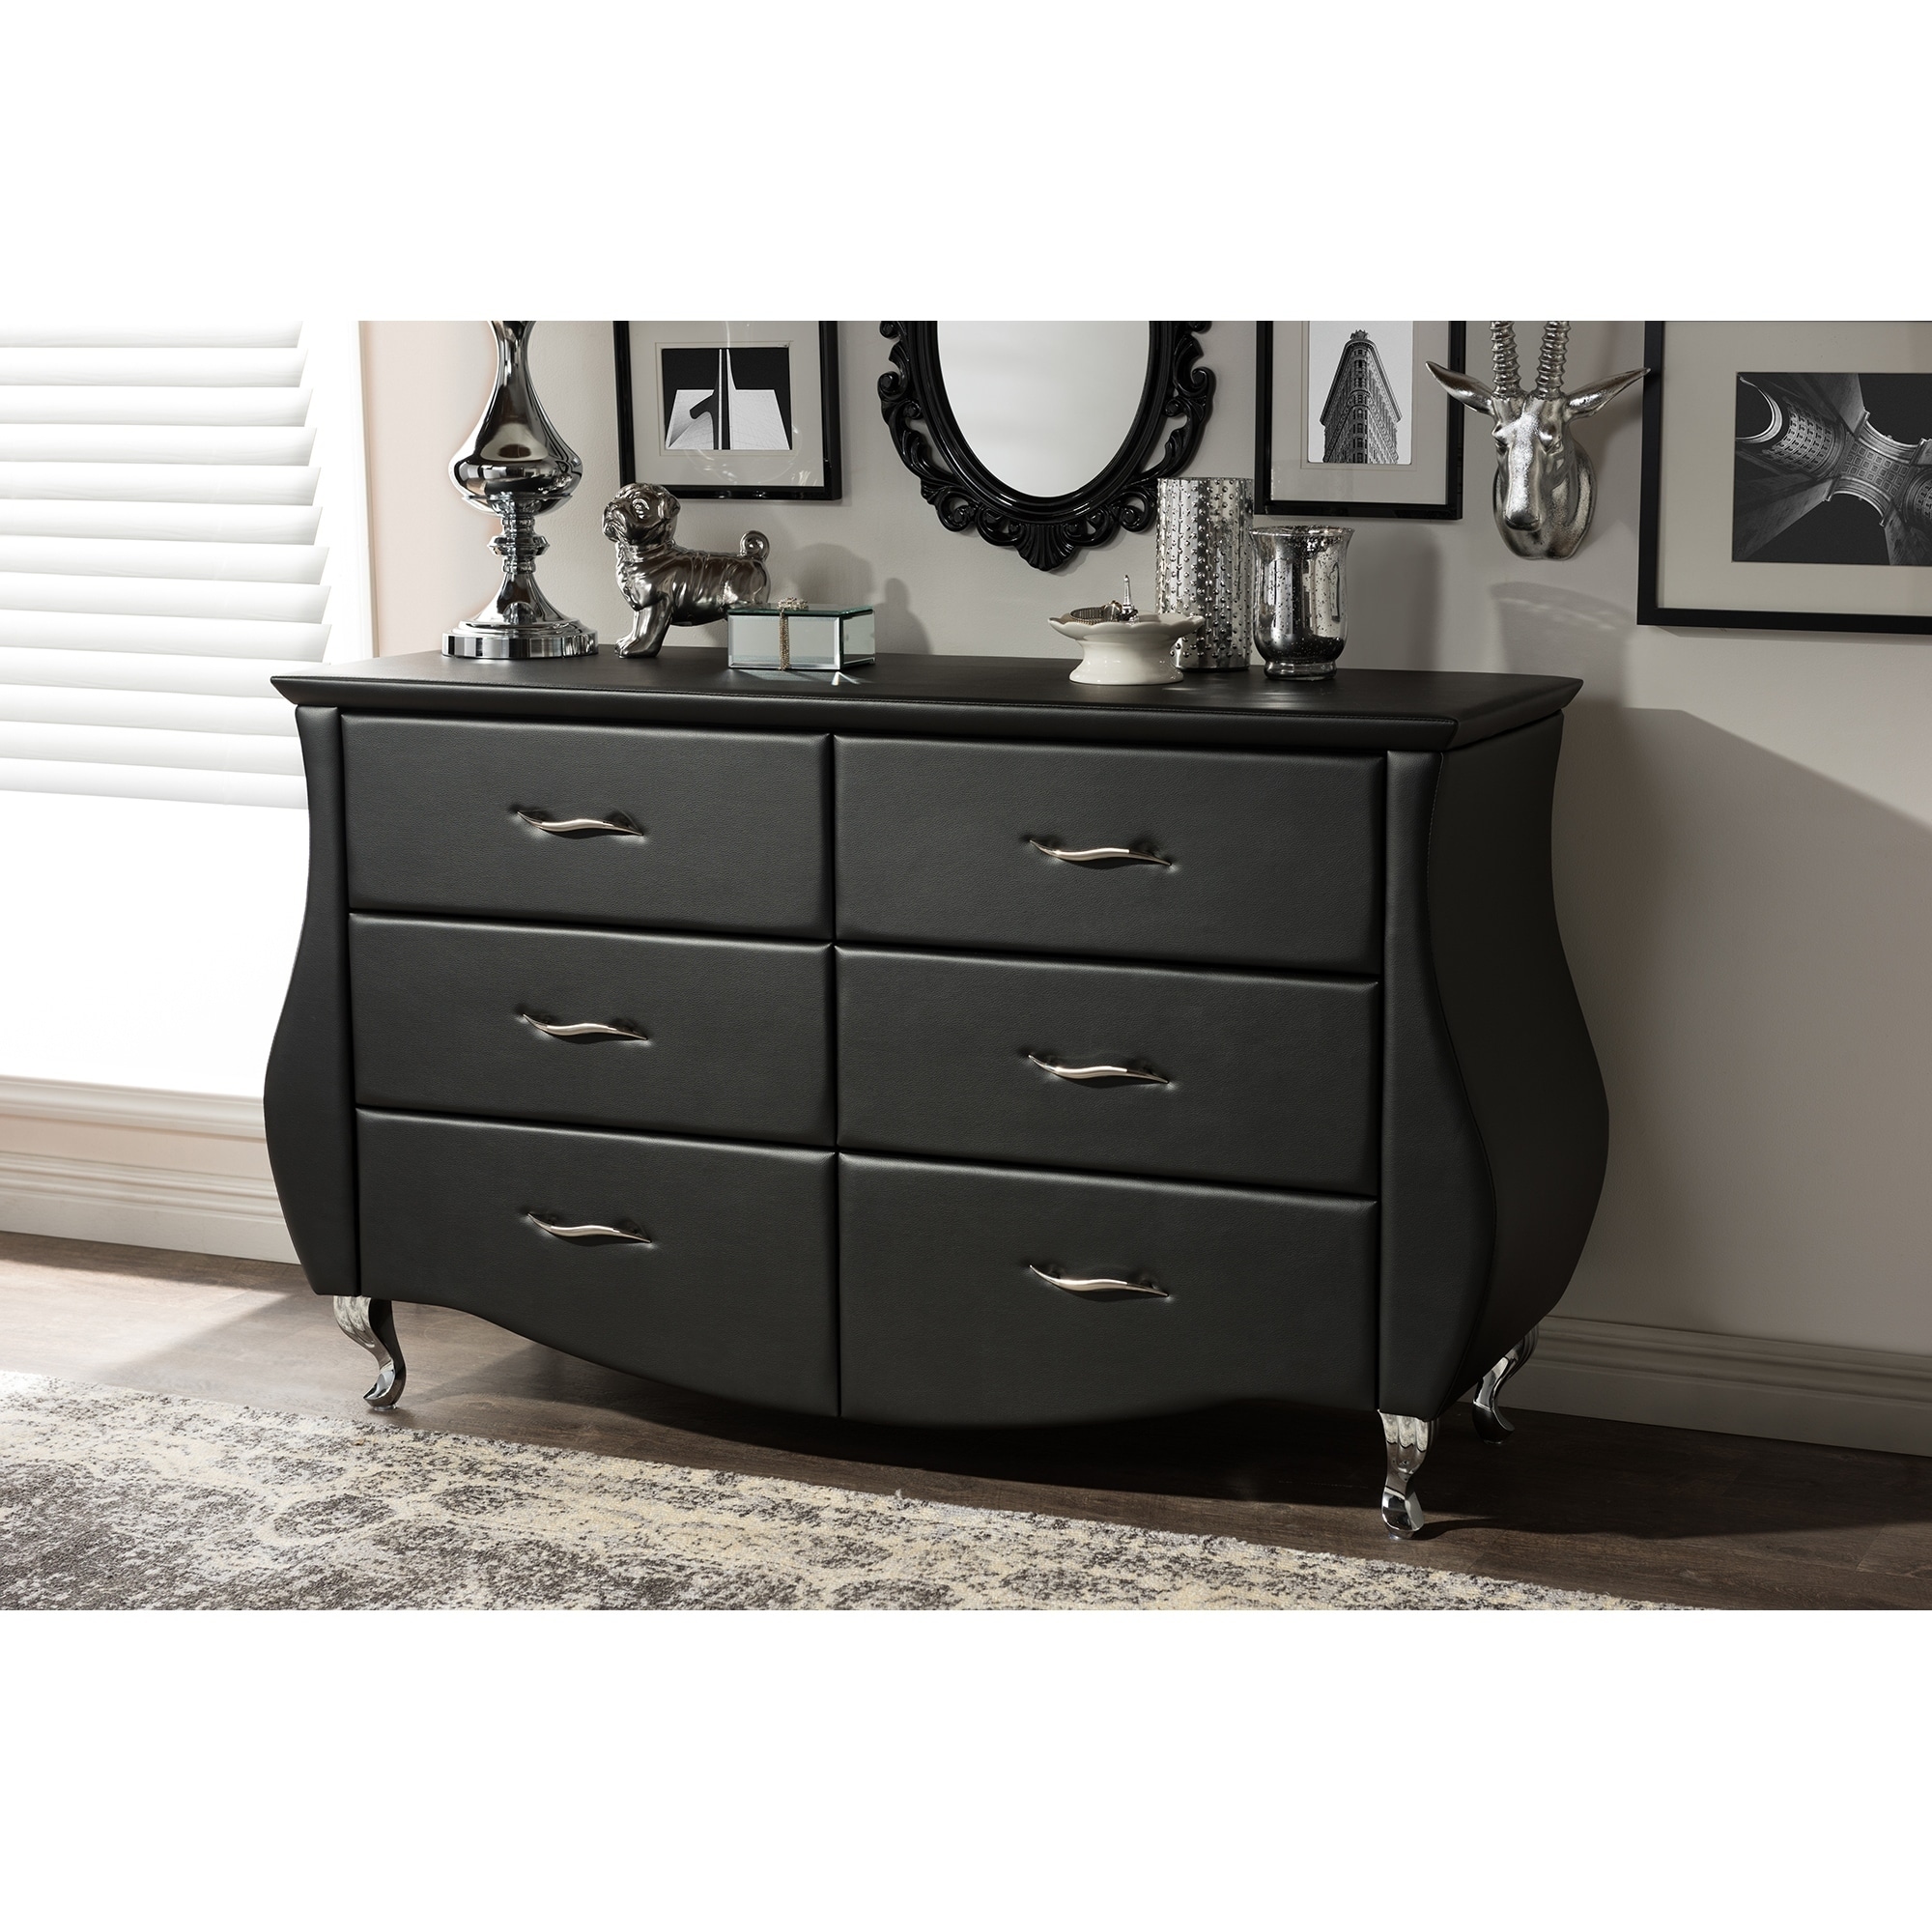 Shop Contemporary Black Faux Leather 6 Drawer Dresser Overstock